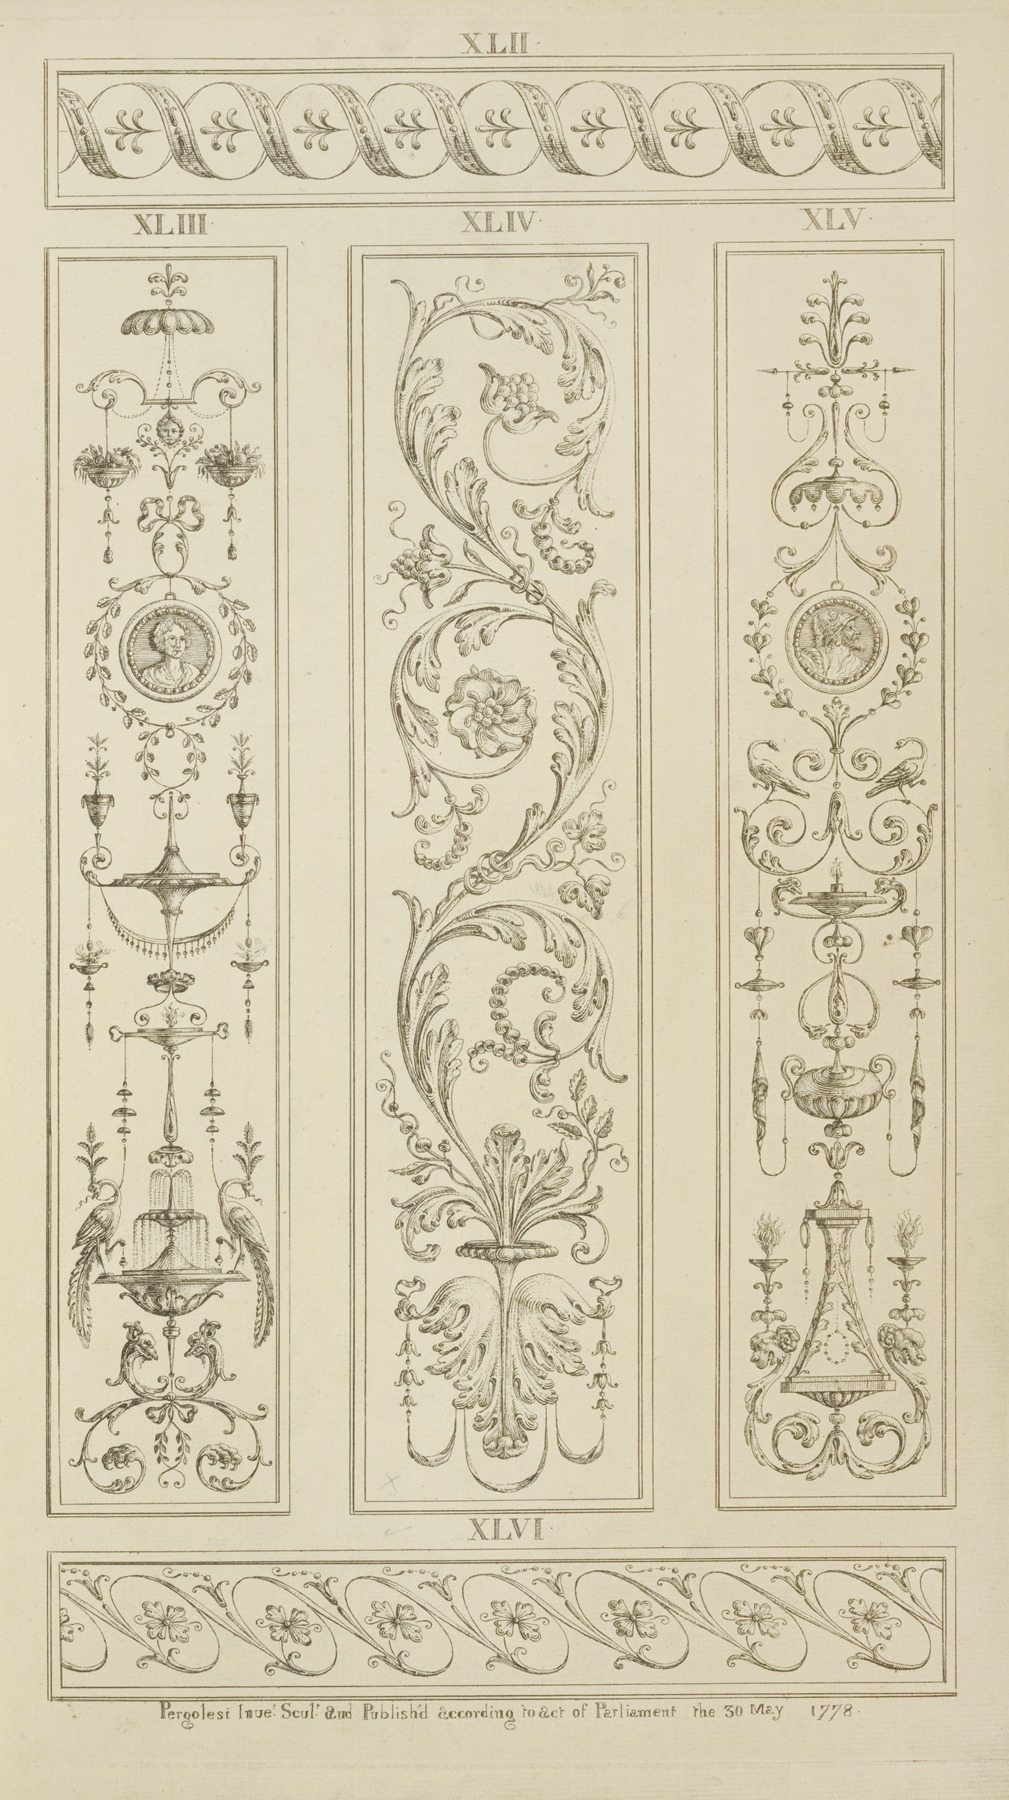 Michel Angelo Pergolesi - Three central vertical ornamental designs of vegetal shapes and leaves.